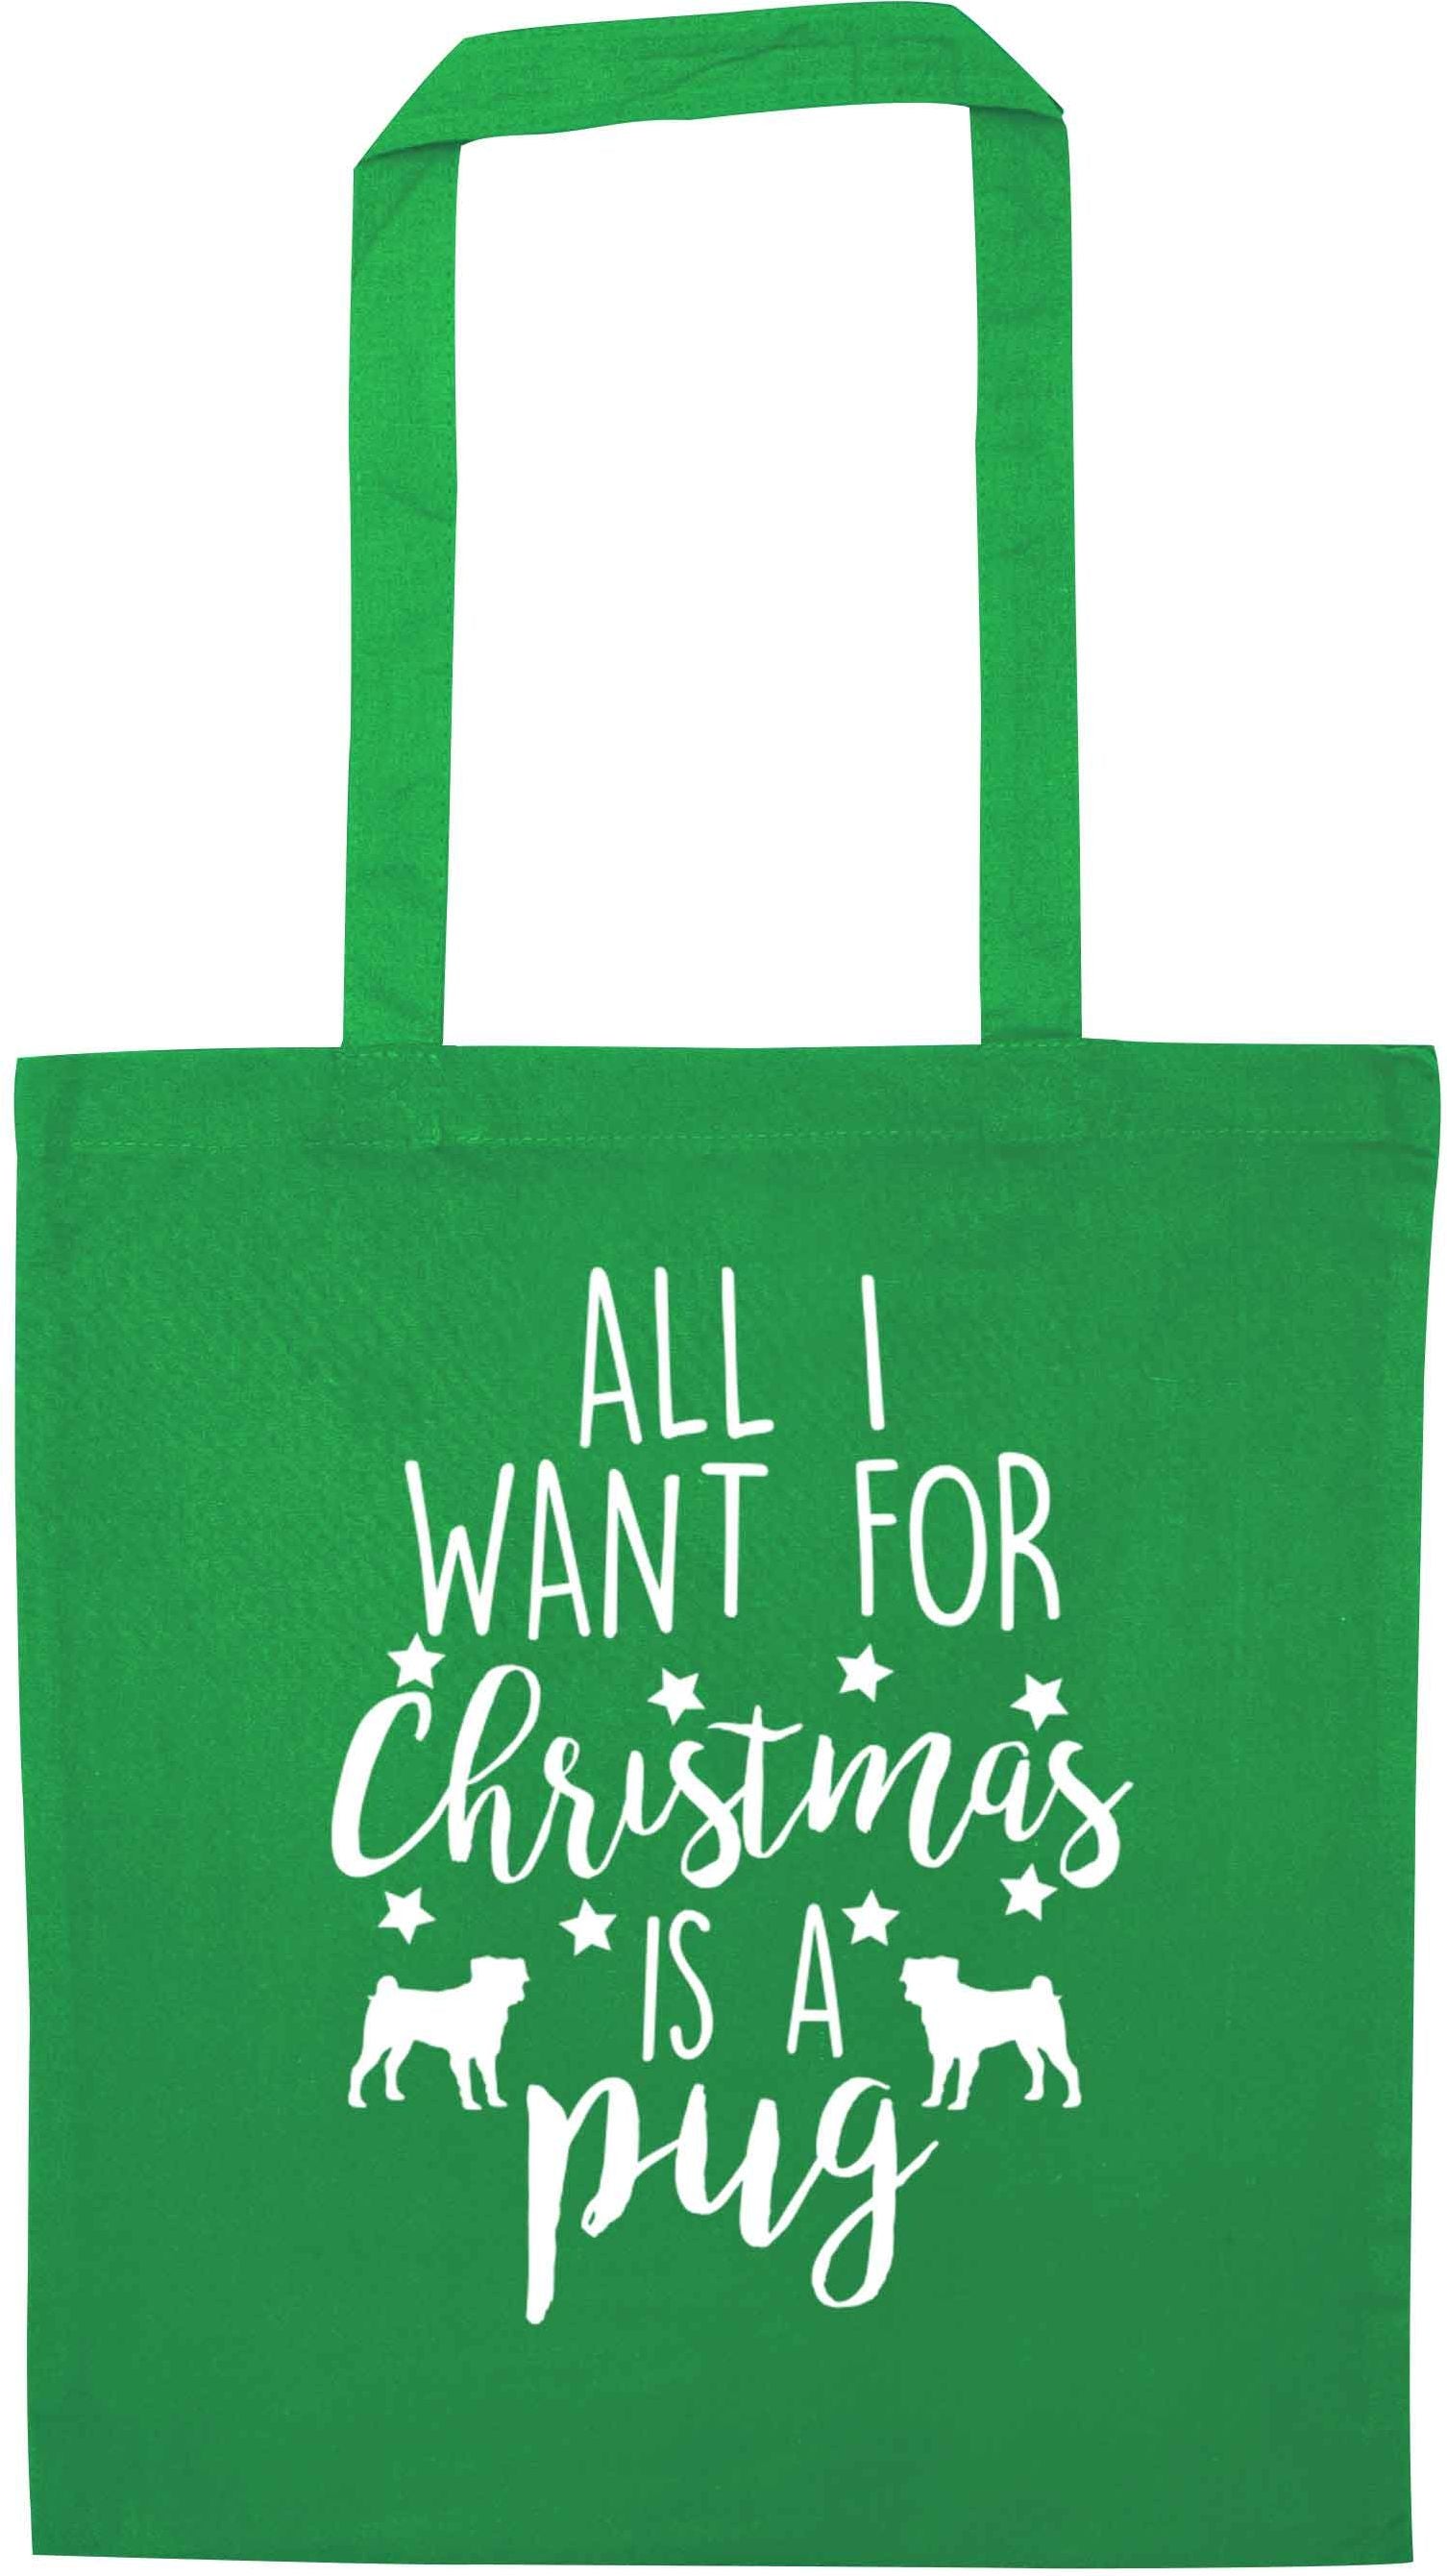 All I want for Christmas is a pug green tote bag